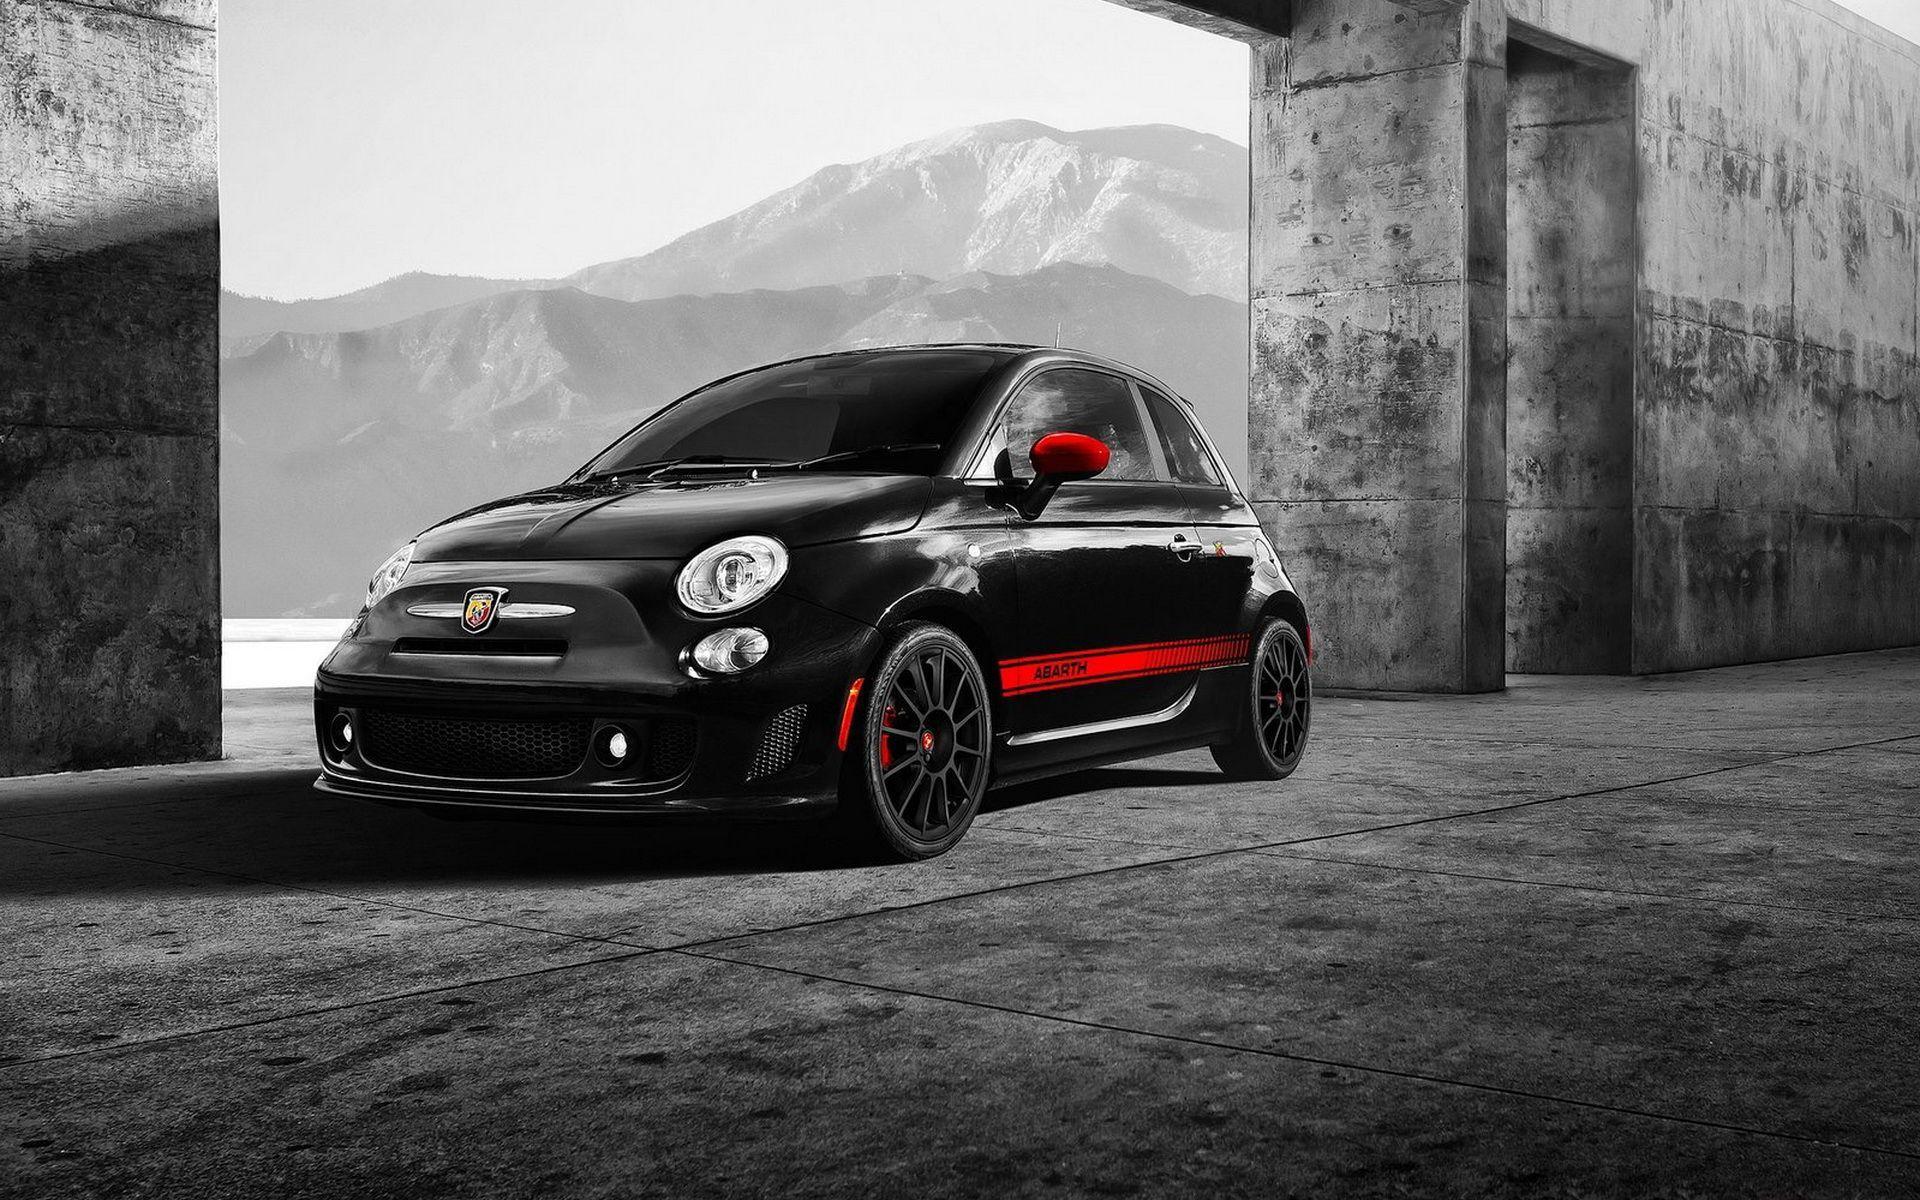 Abarth wallpapers